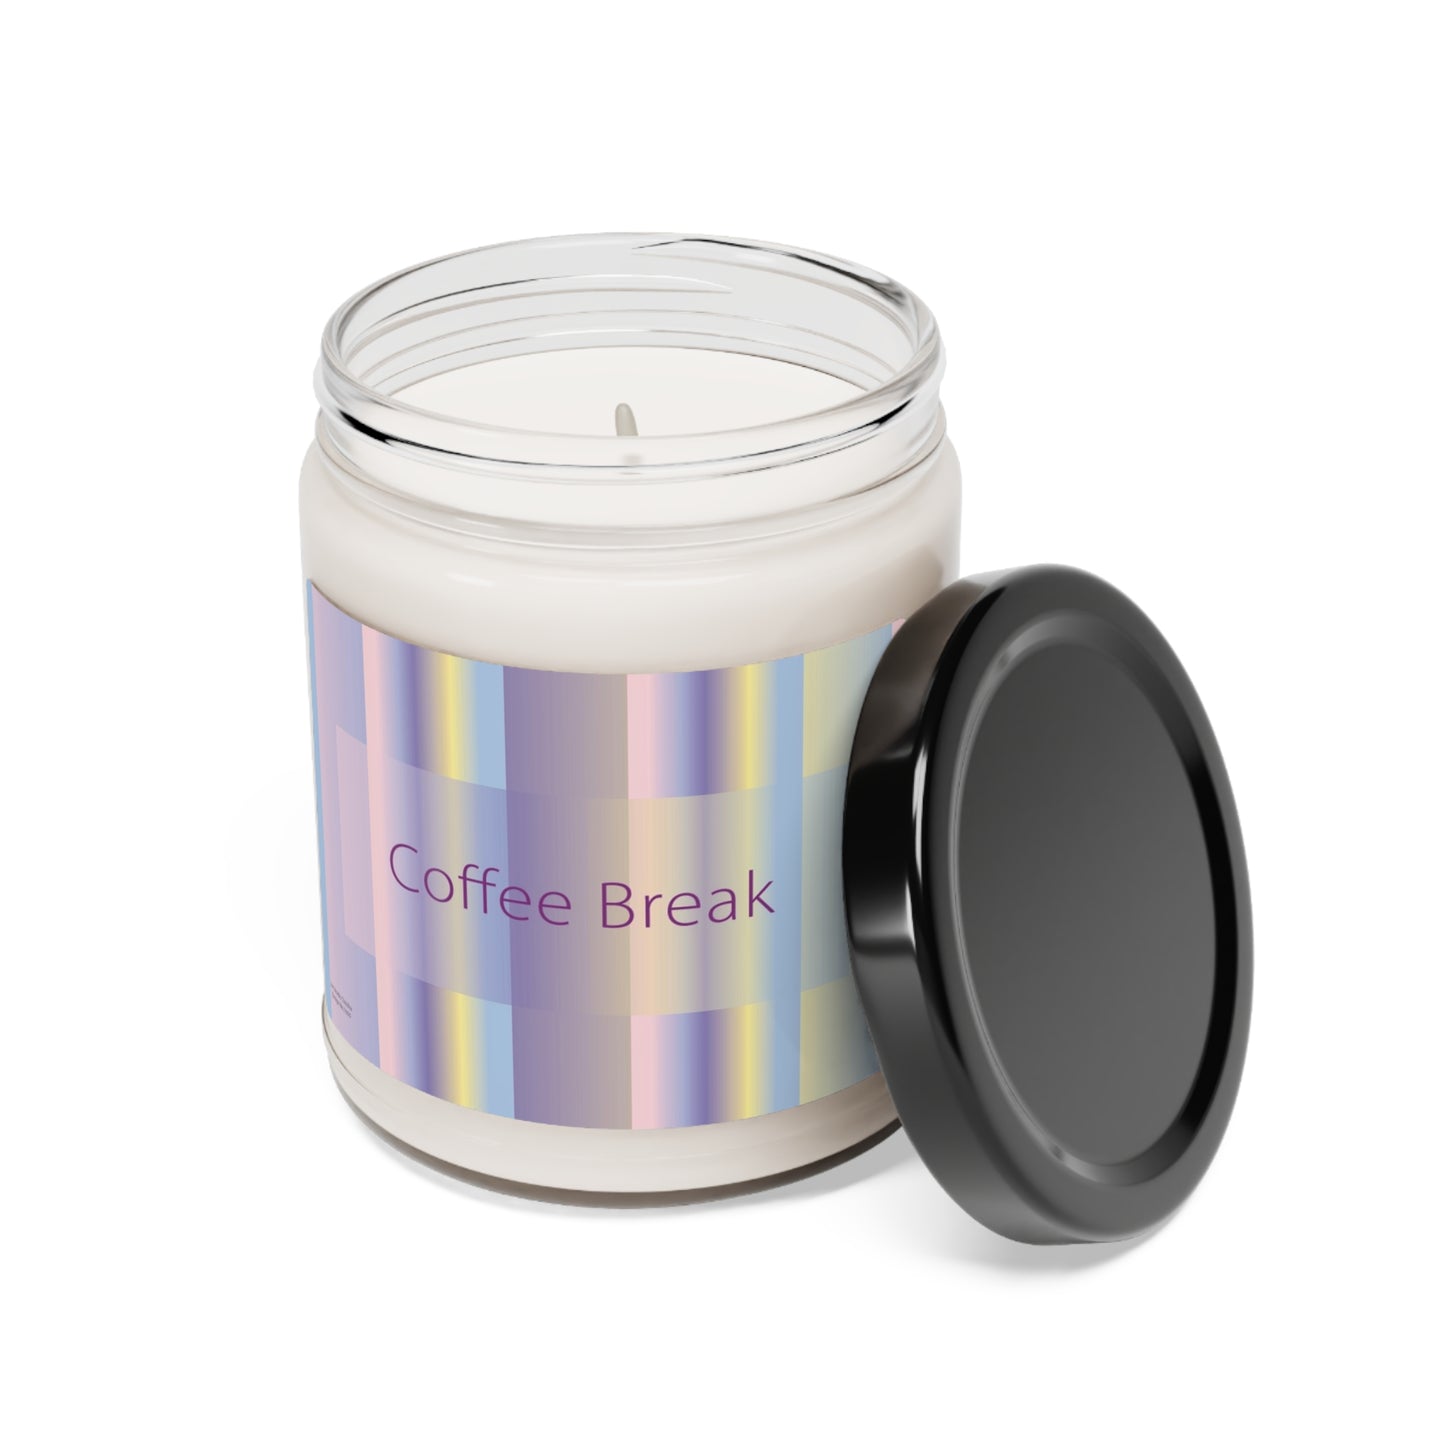 Scented Soy Candle, 9oz Coffee Break - Design No.1600